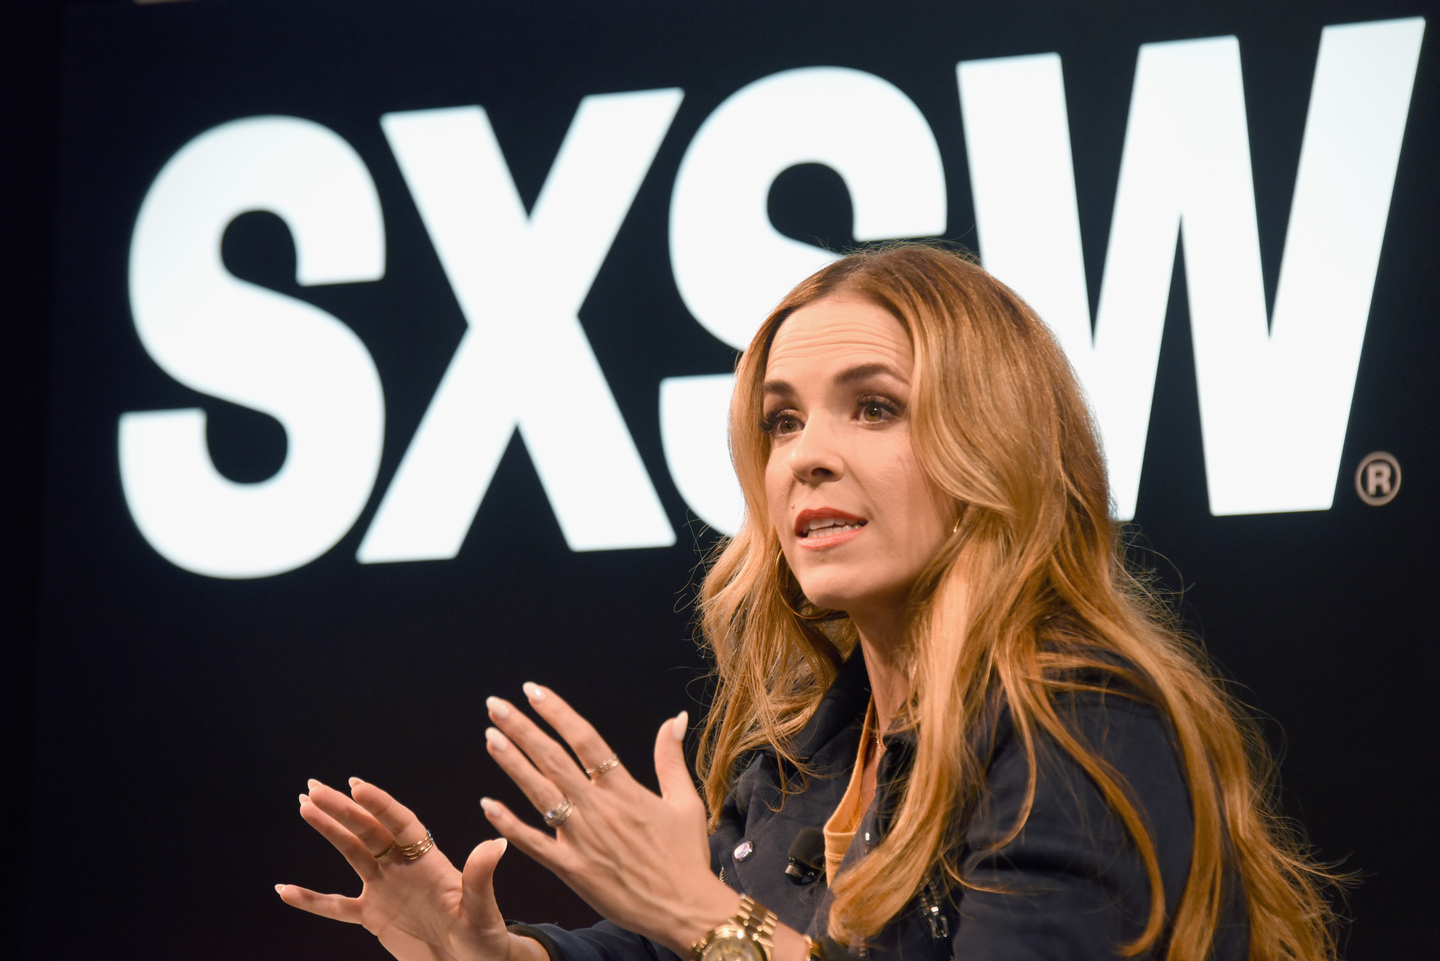 Rachel Hollis at her Featured Session – Photo by Dave Pedley/Getty Images for SXSW